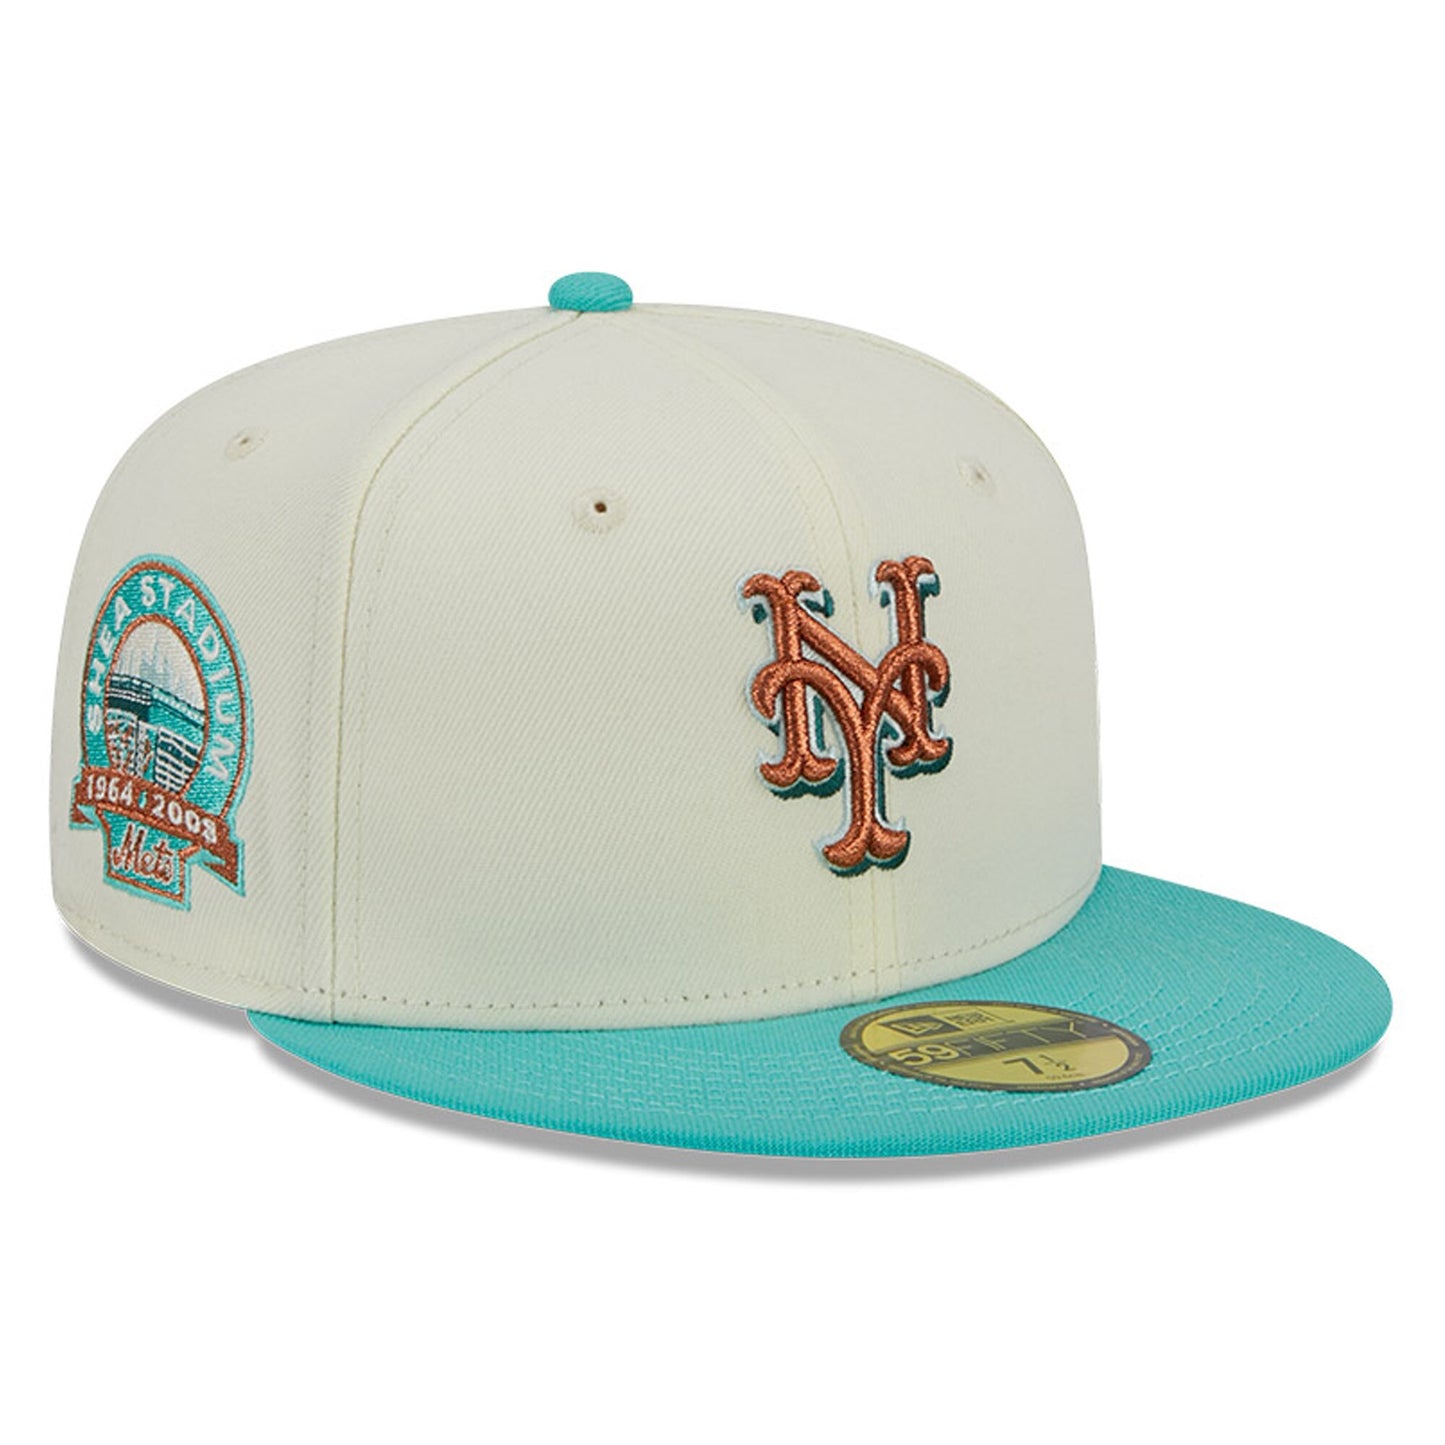 New York Mets New Era City Icon 59FIFTY Fitted Hat - White